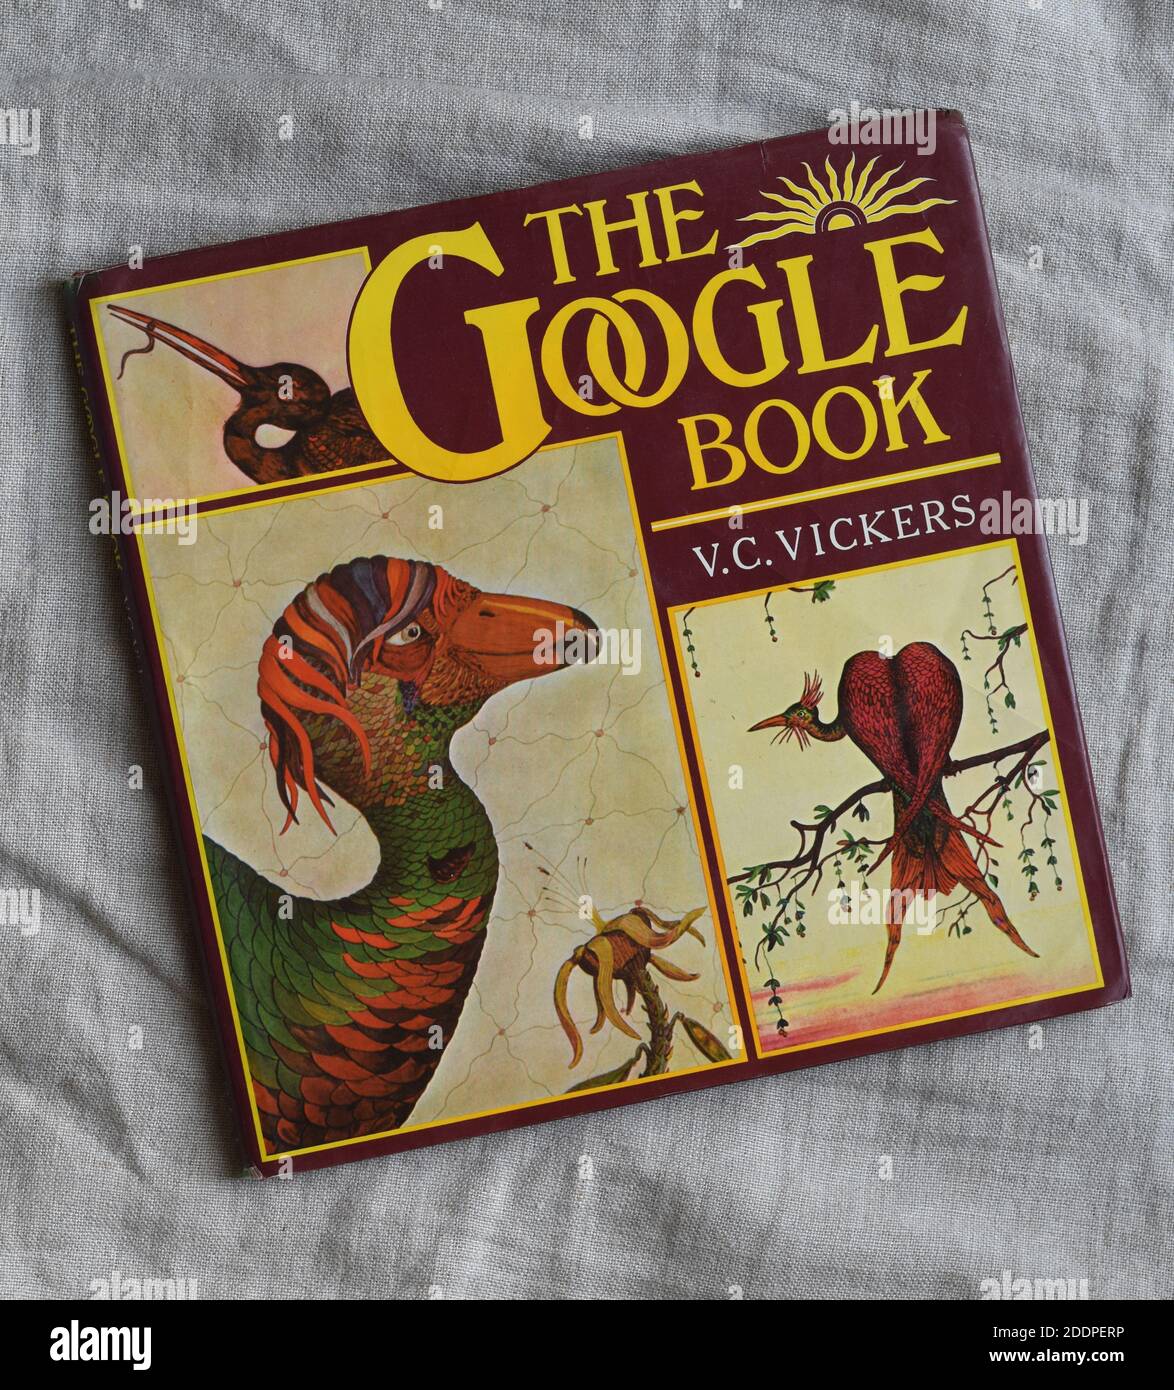 'The Google Book' by V C Vickers. Originally printed in 1913 the book shown is a 1979 facsimile / copy. Stock Photo